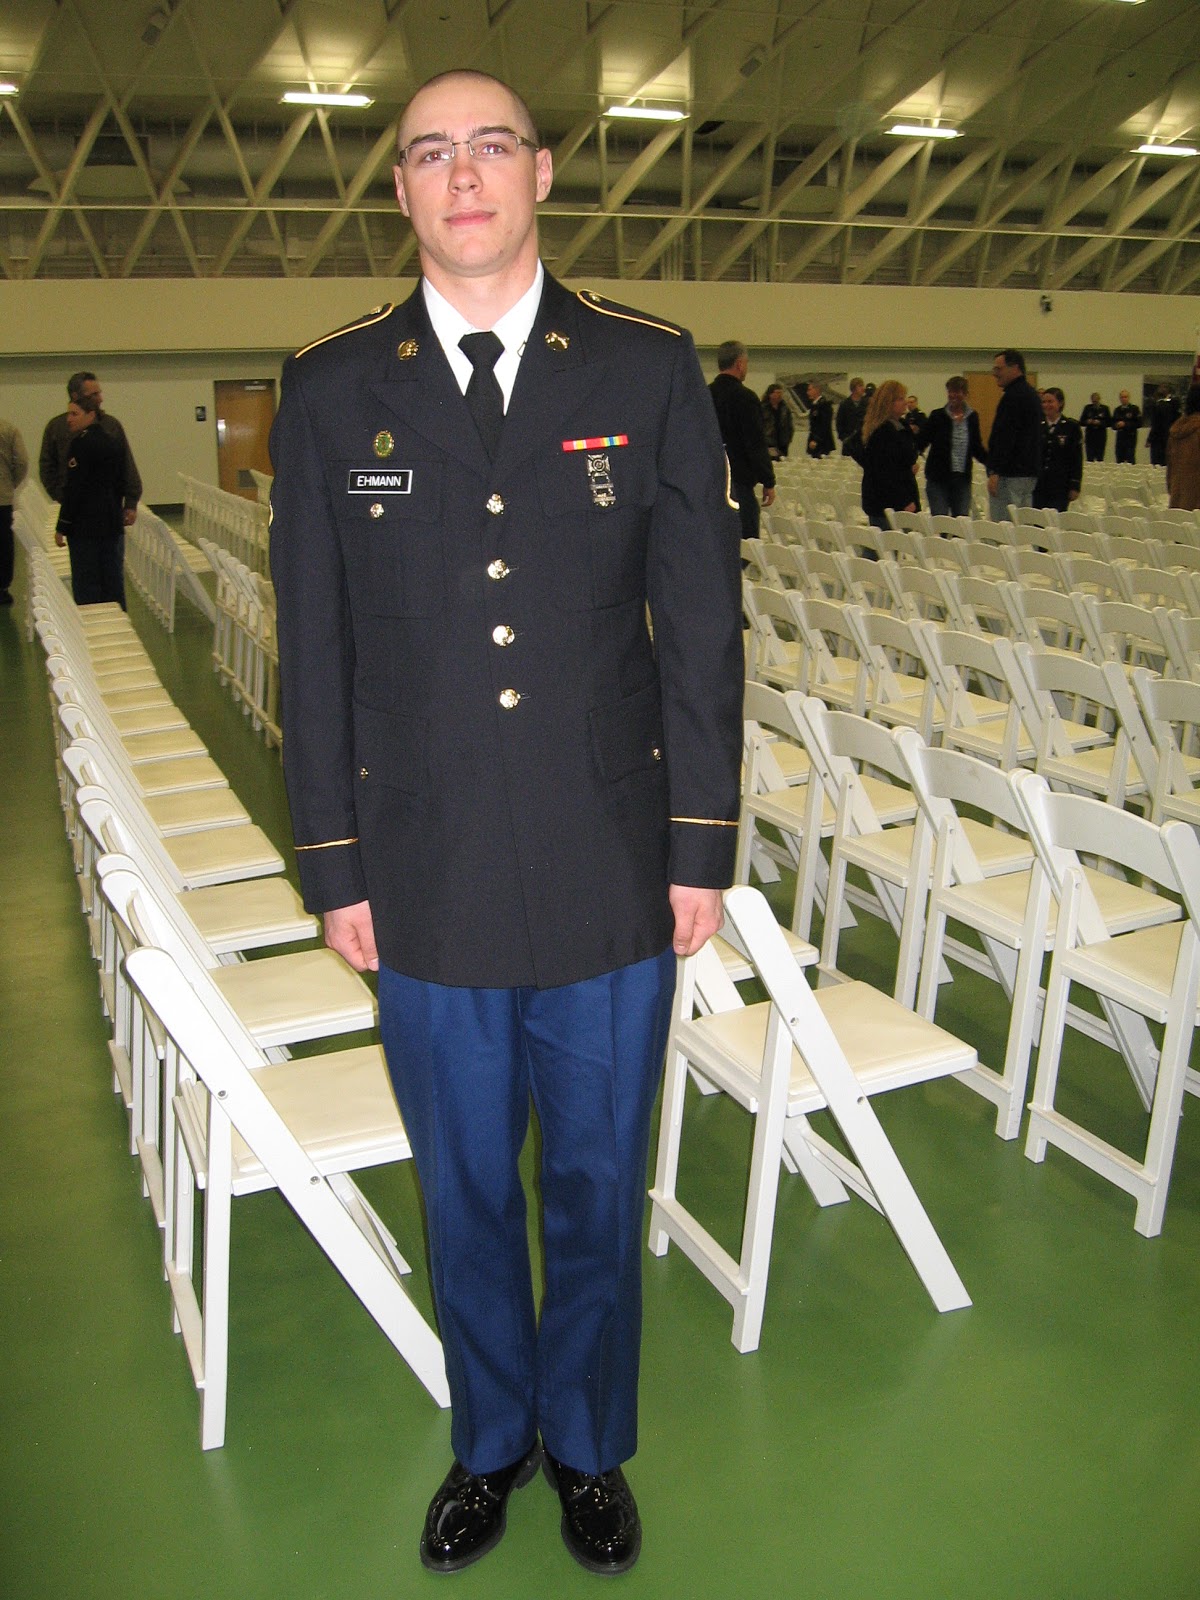 Worms Wonderings: My Soldier, Private First Class Ehmann